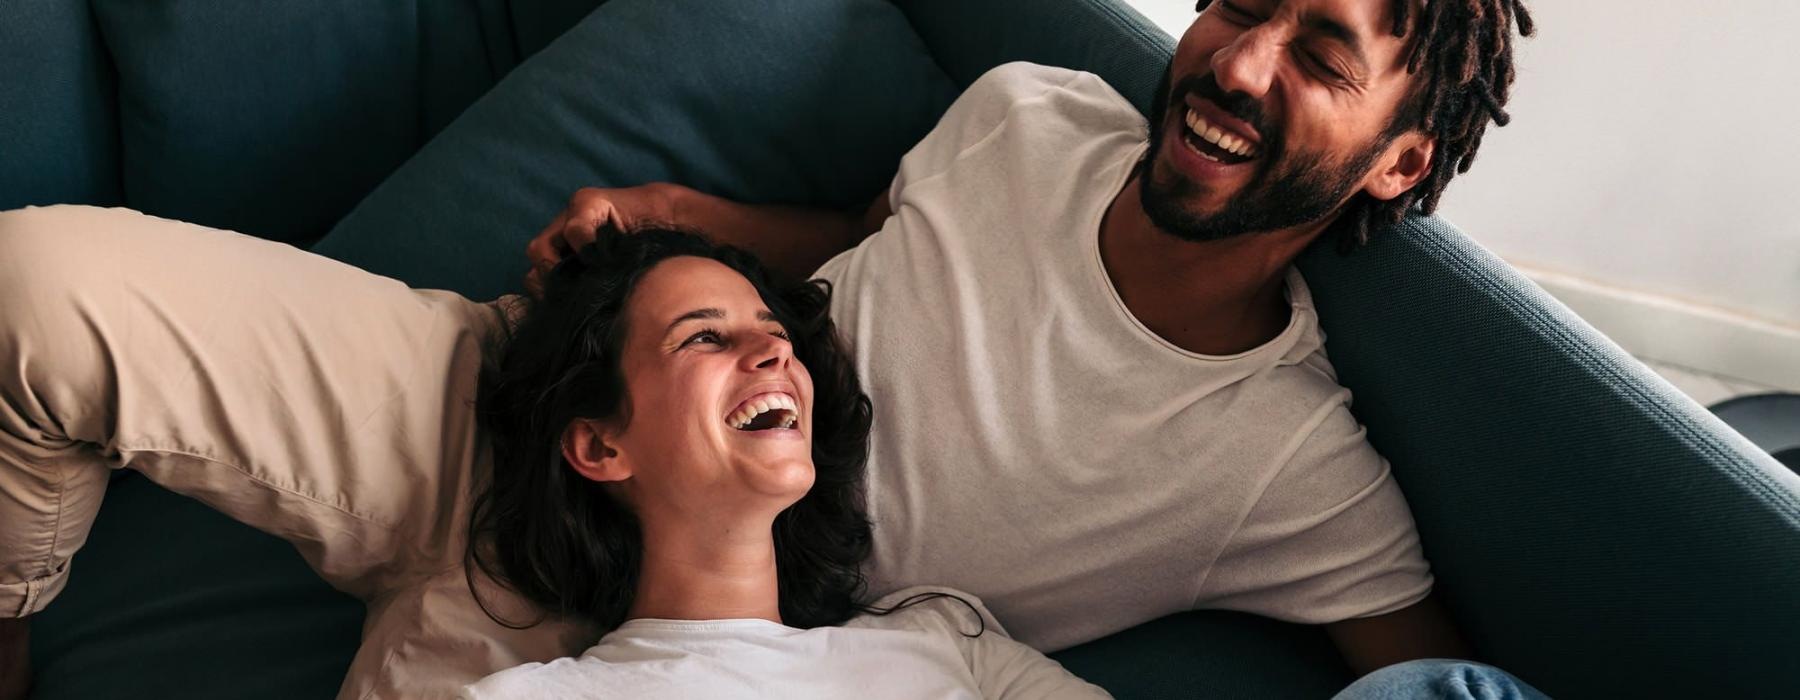 a man and woman laughing